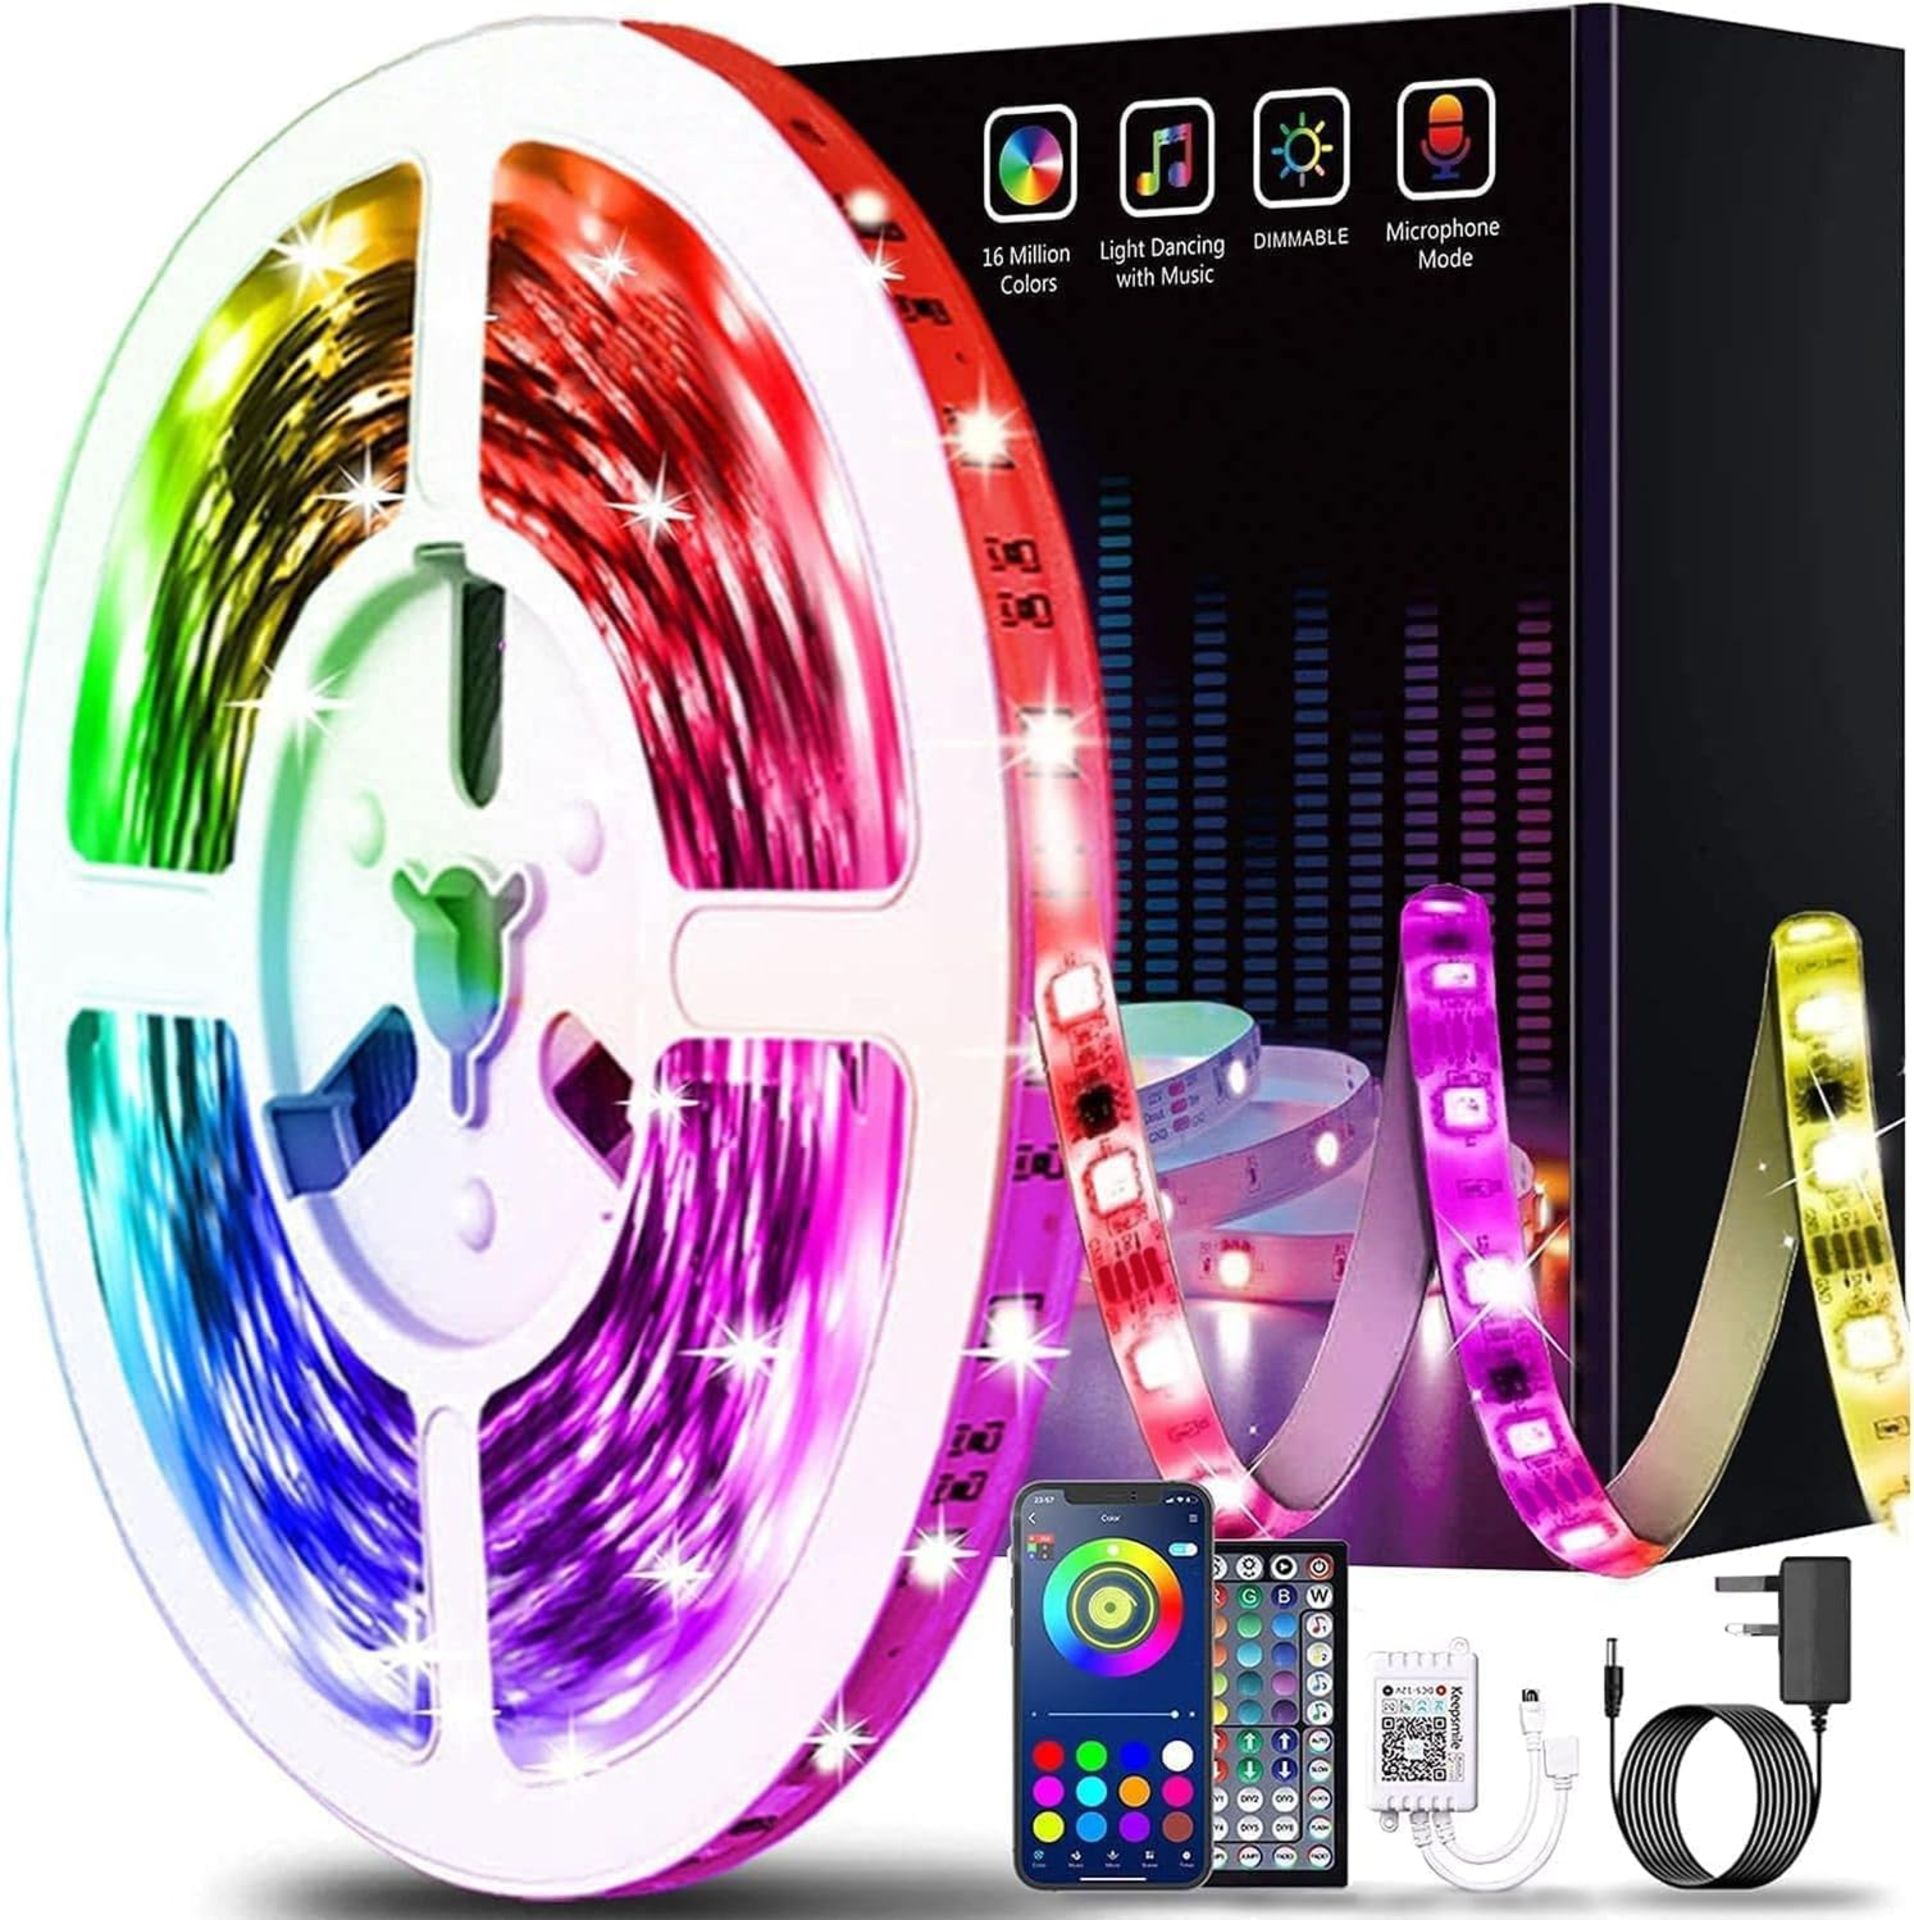 RRP £190 Collection (16 pieces) of Keepsmile 15M Led Strip Lights Smart App Control Music Sync Color - Image 2 of 3